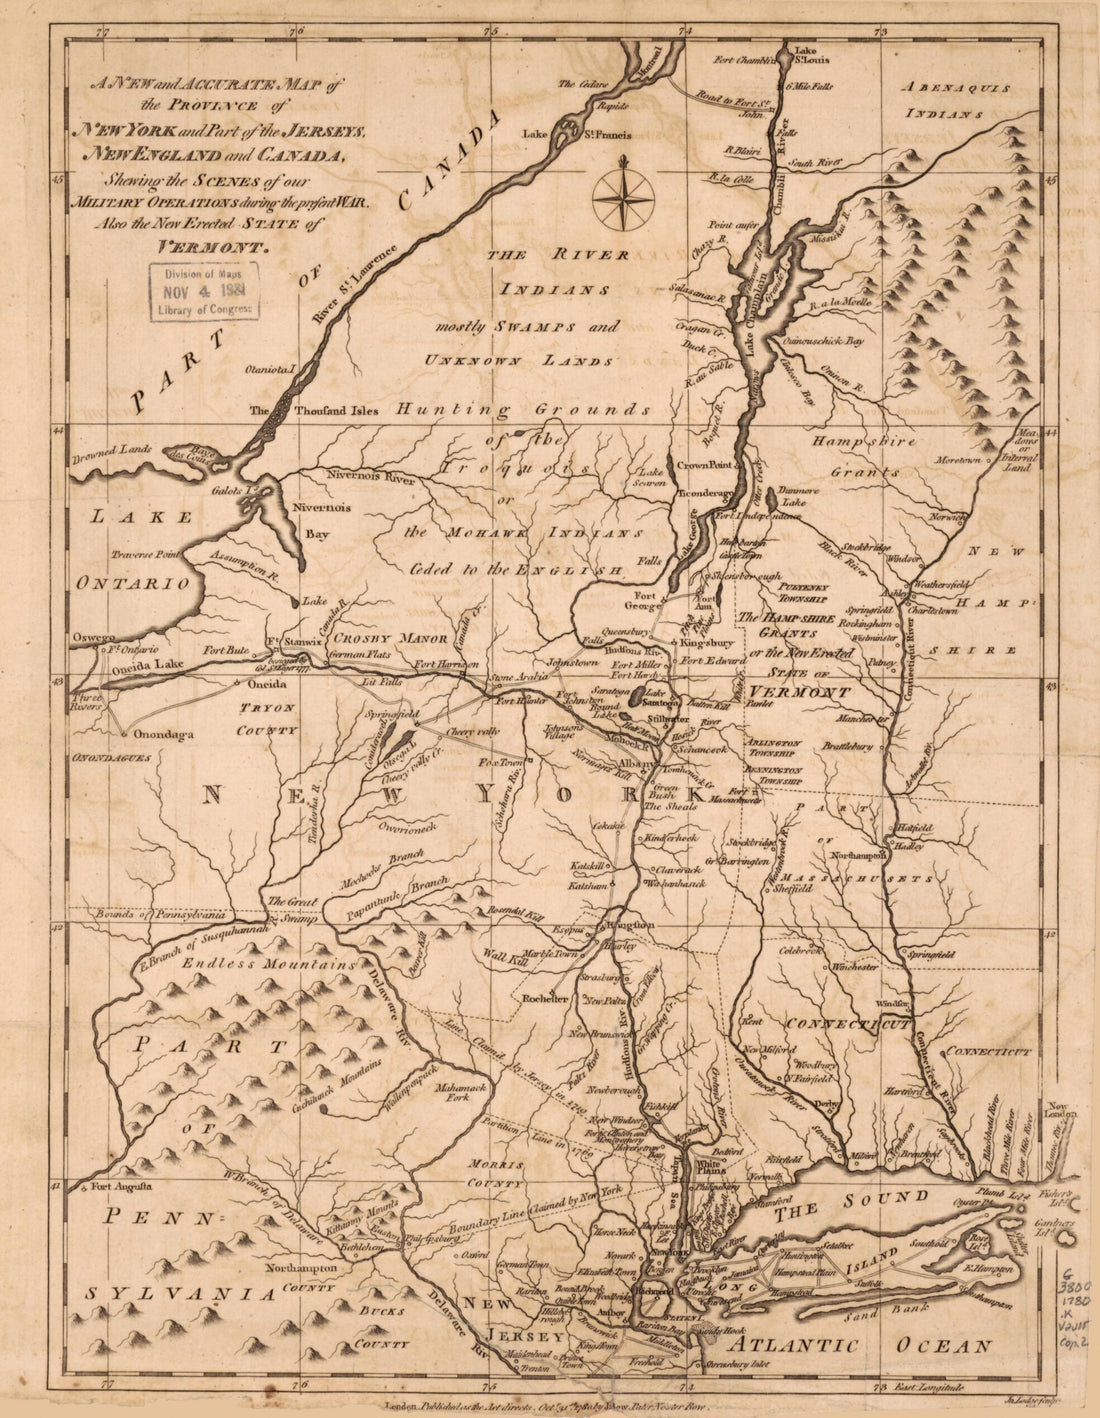 This old map of A New and Accurate Map of the Province of New York and Part of the Jerseys, New England and Canada, Shewing the Scenes of Our Military Operations During the Present War : Also the New Erected State of Vermont from 1780 was created by John